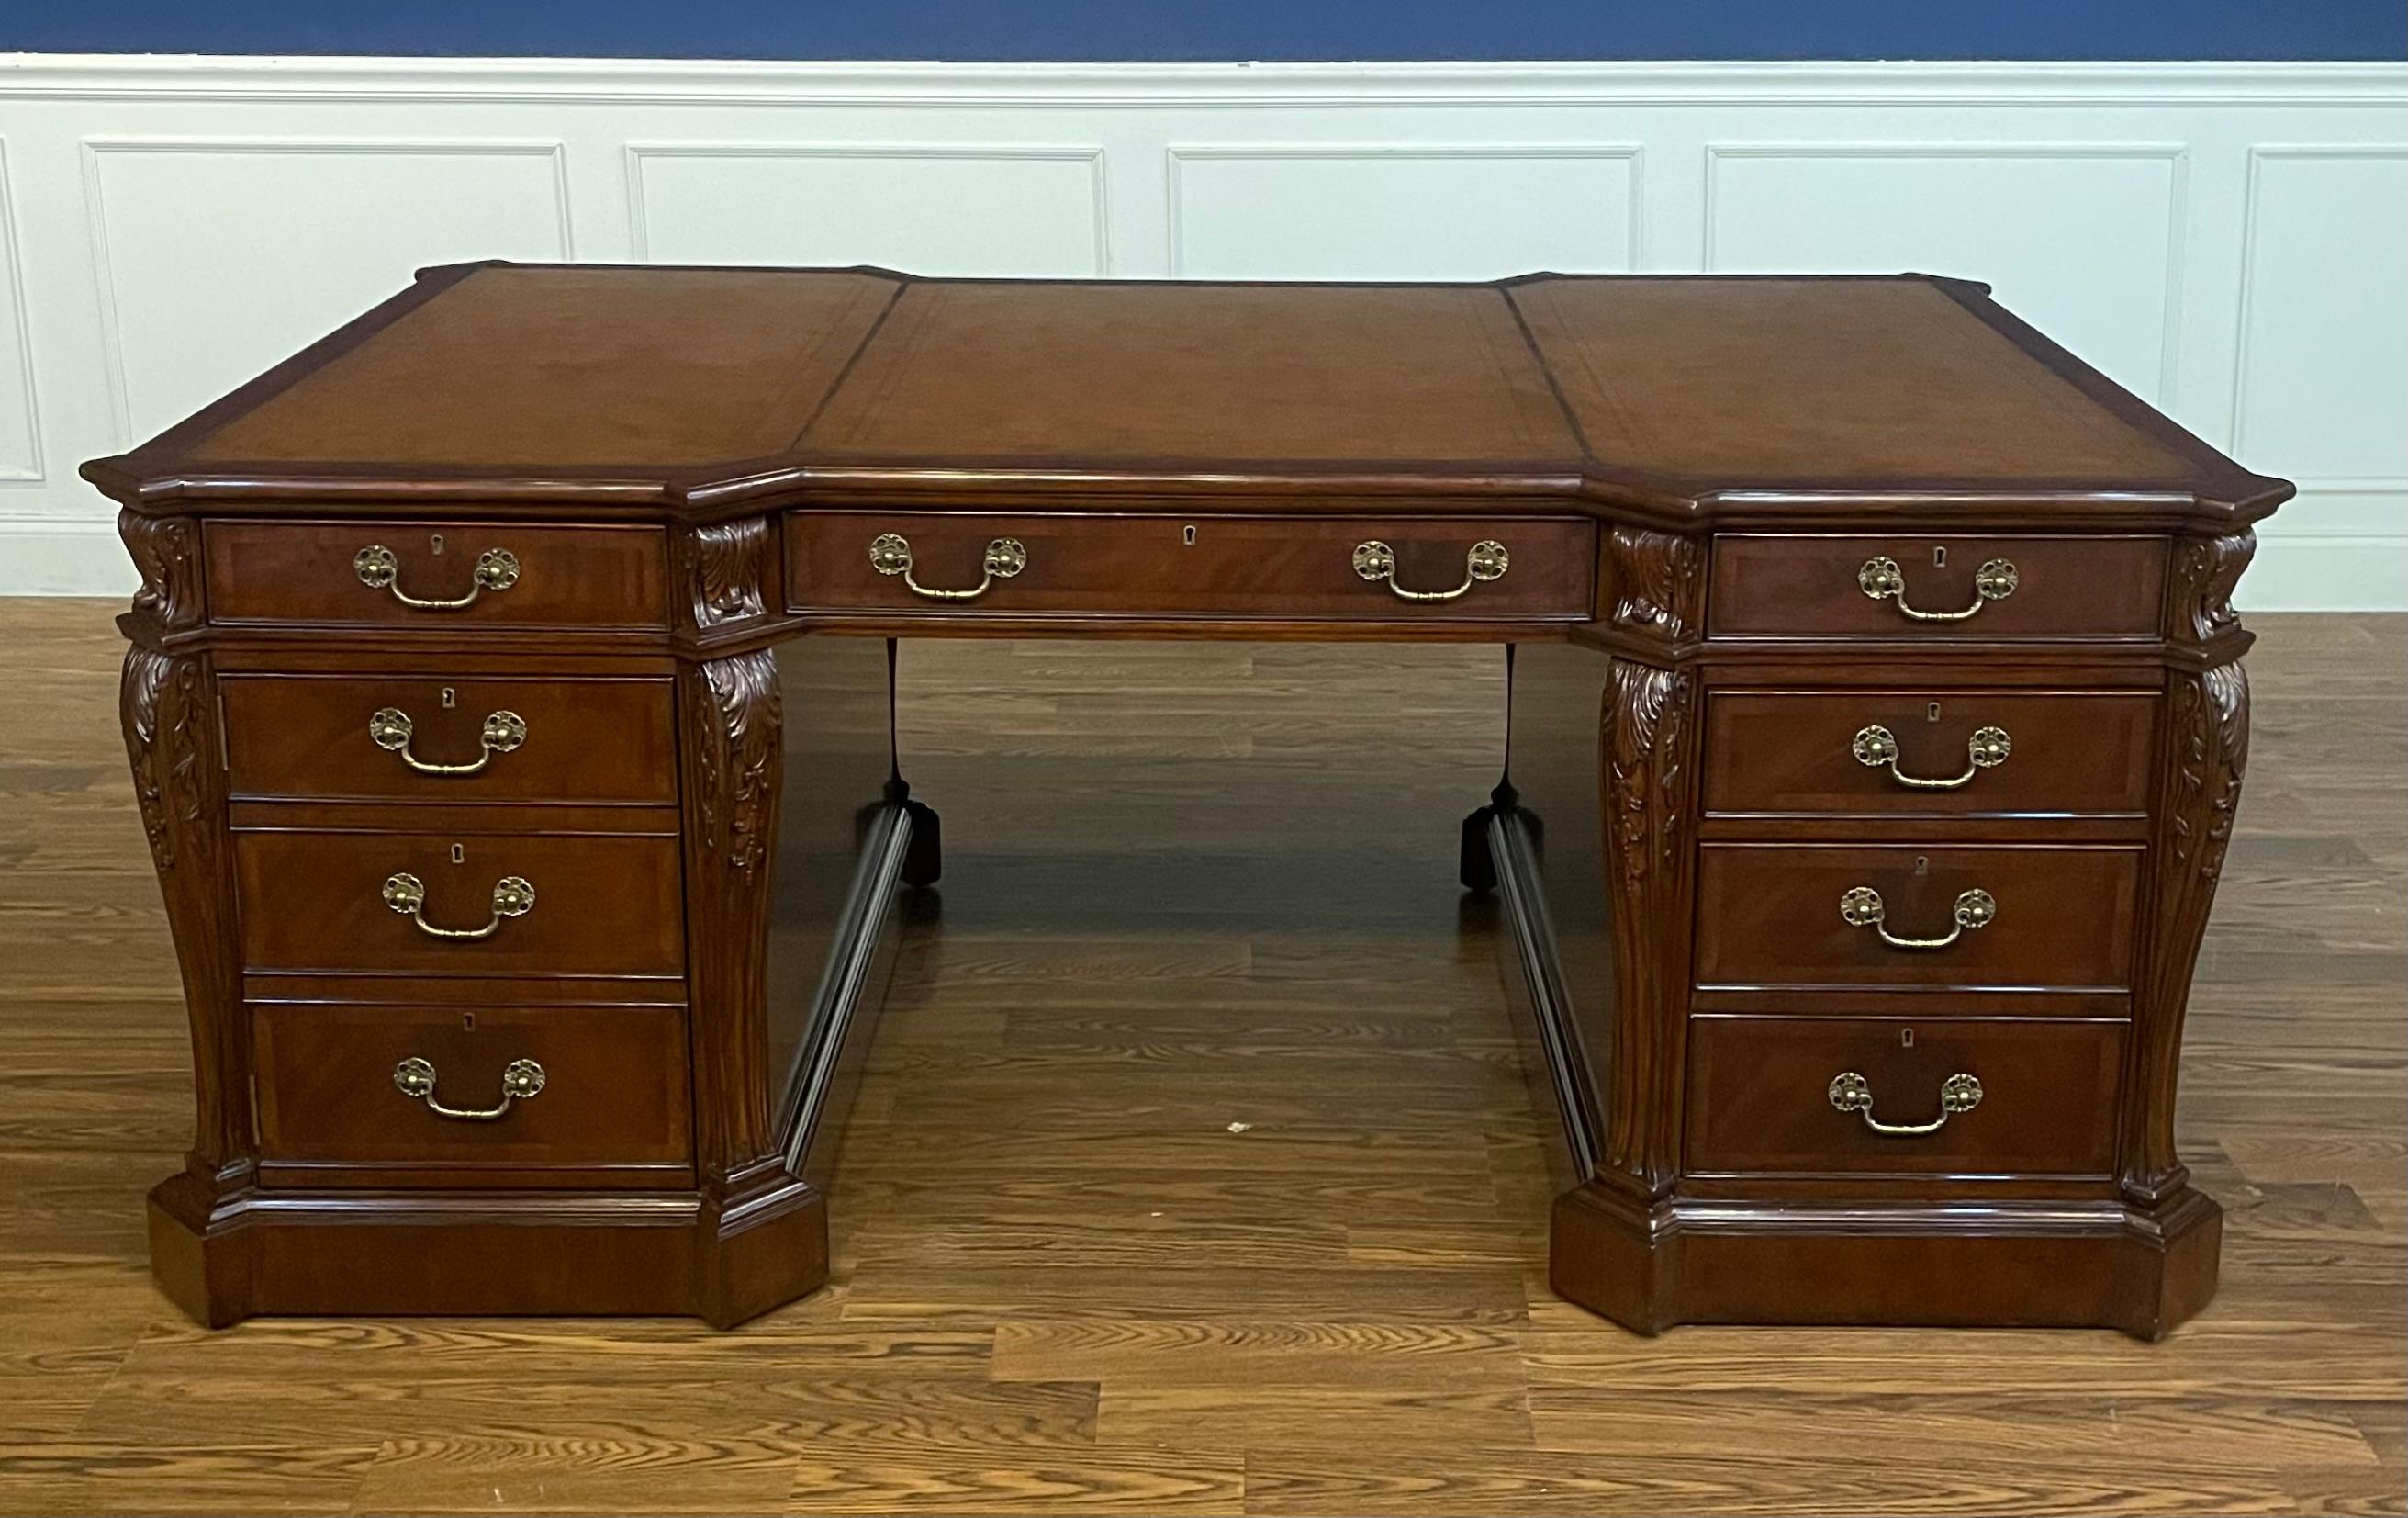 This is a new traditional mahogany partners desk. Its design was inspired by partners desks from the 1800s. It is ideal for the senior partner, CEO or home office. It features a top of brown leather with gold tooling. Its front, back and side panels